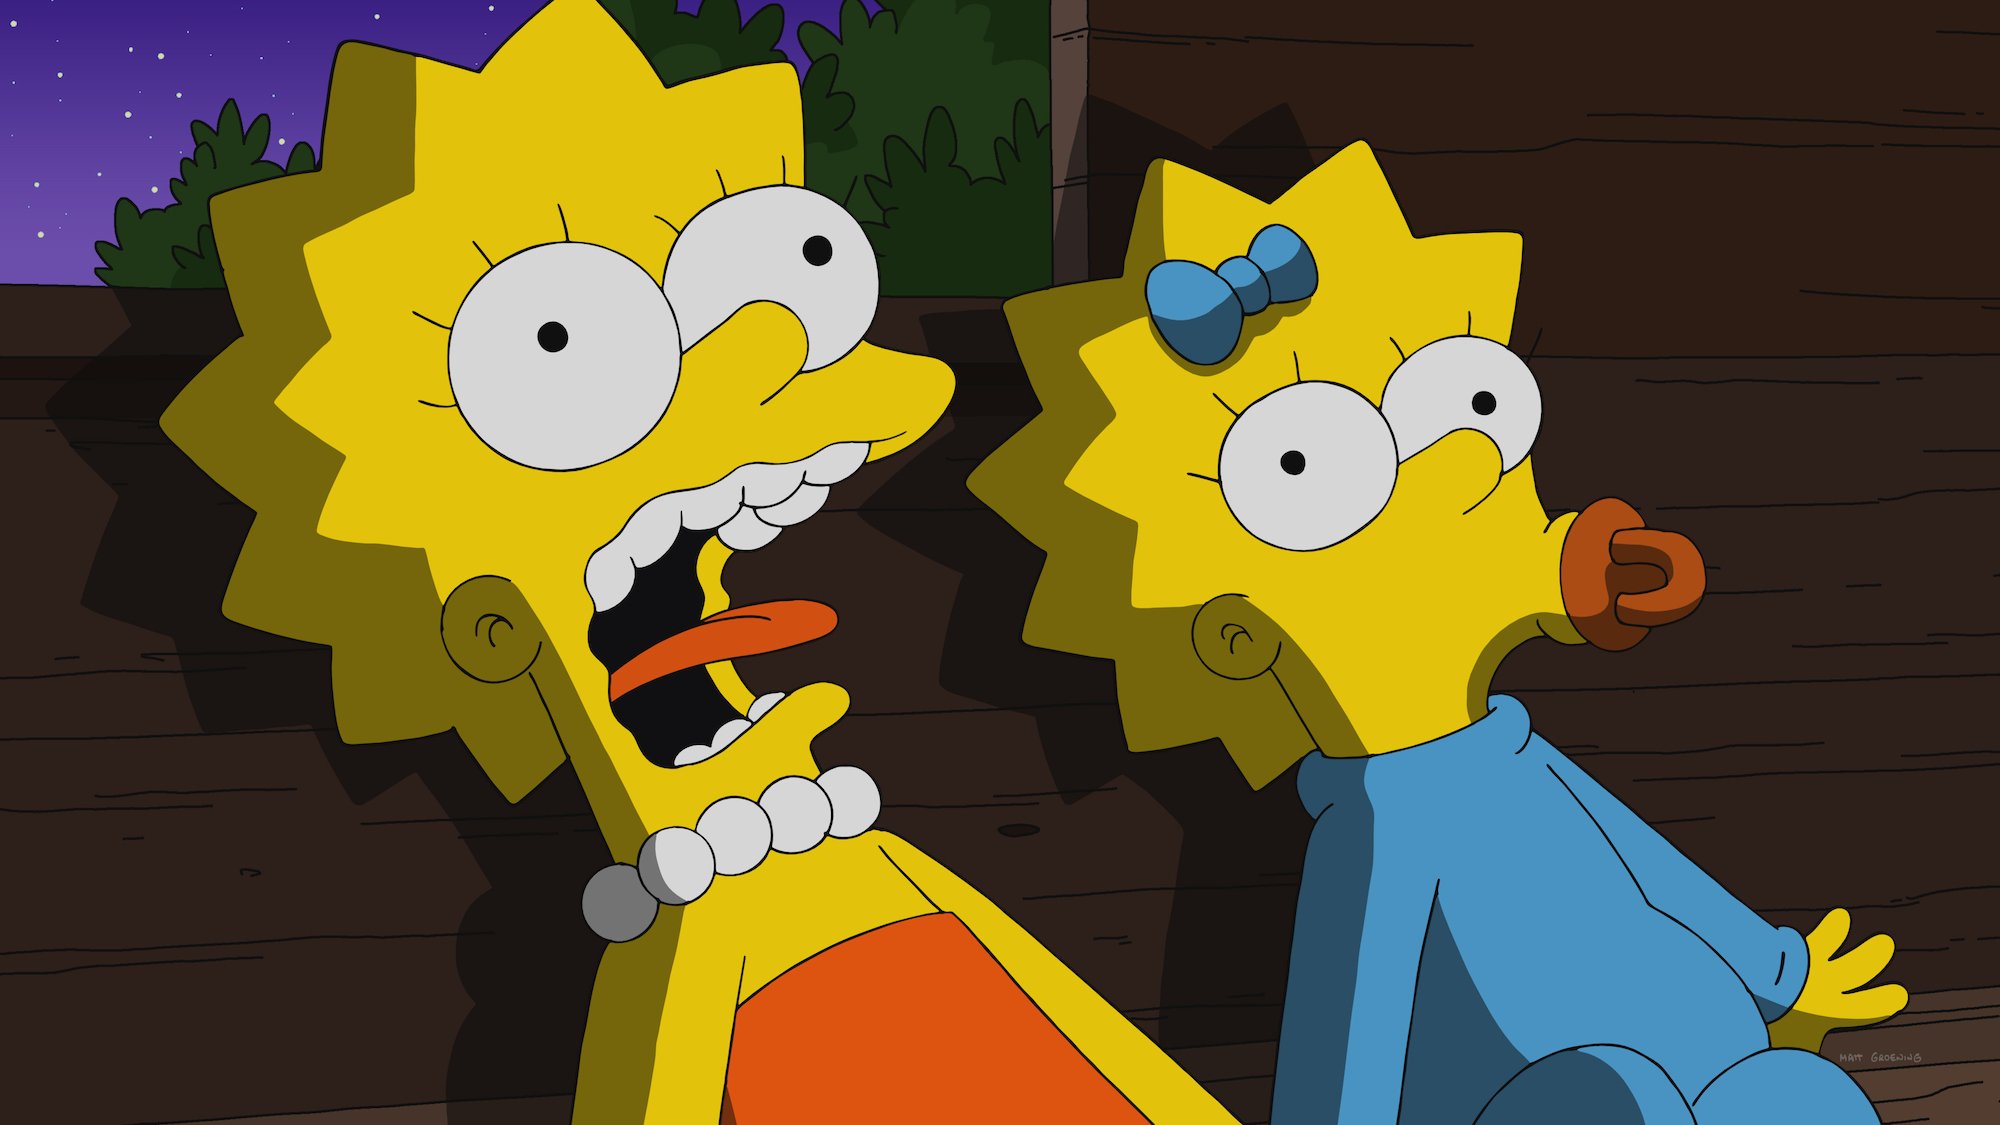 The Simpsons: Lisa and Maggie scream in Treehouse of Horror XXXII